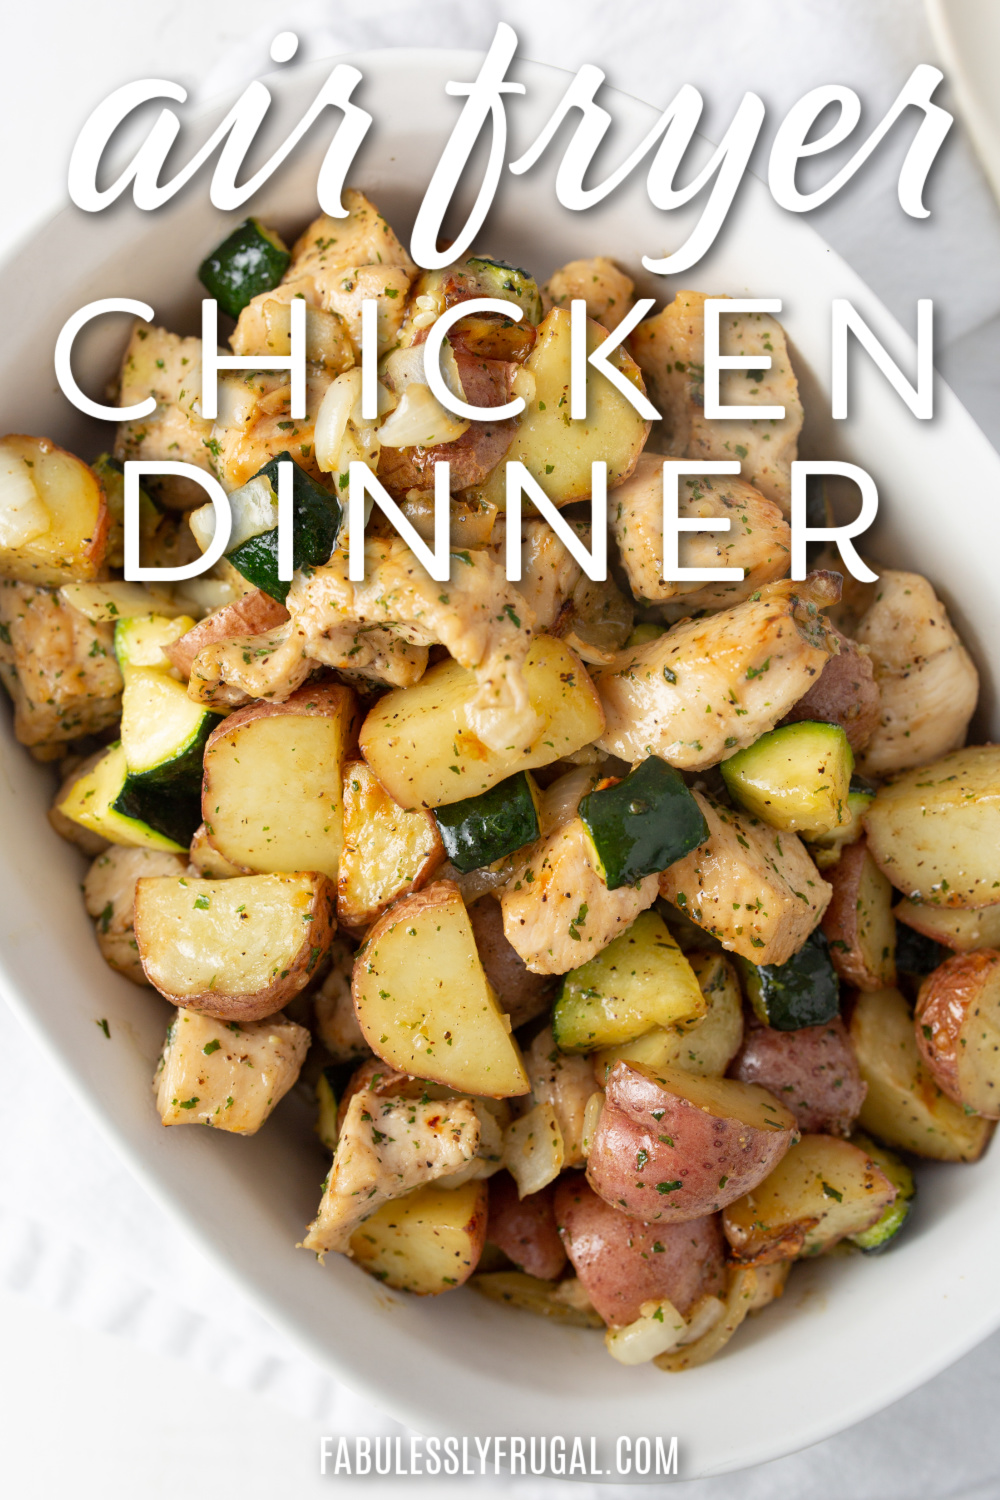 https://fabulesslyfrugal.com/wp-content/uploads/2022/04/how-to-make-ranch-chicken-and-veggies-in-the-air-fryer-4.jpg